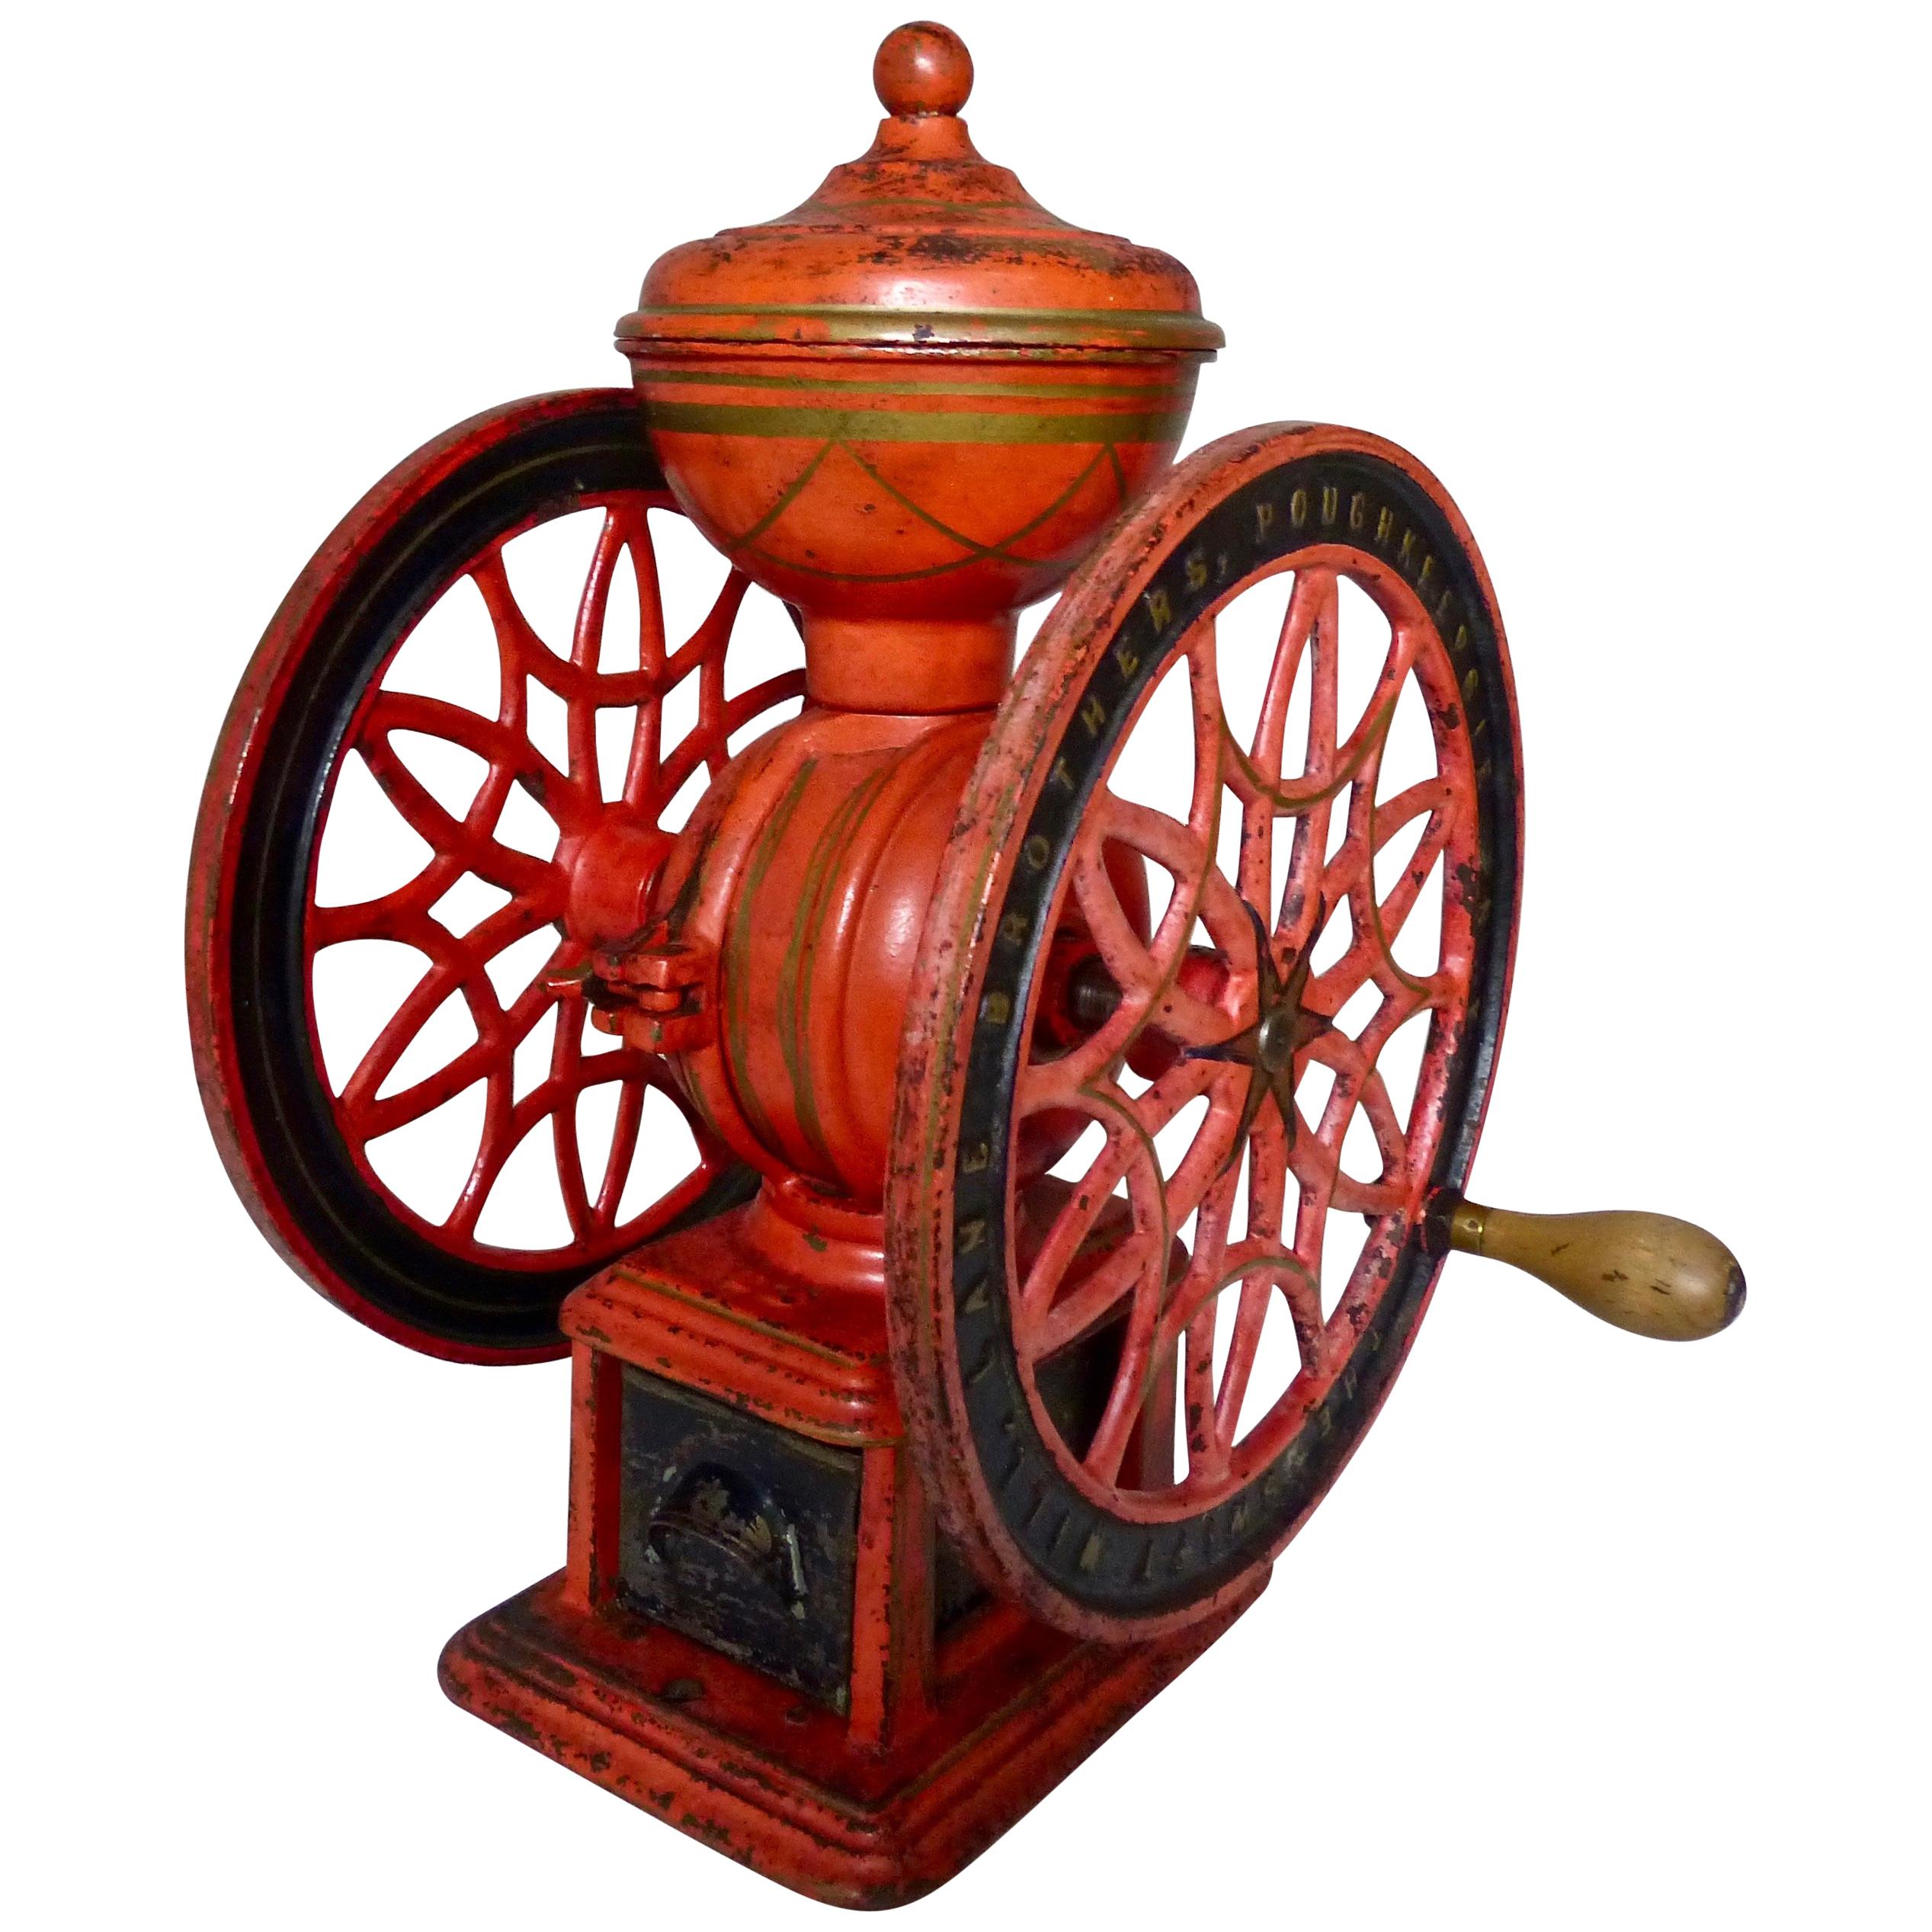 1880s Coffee Grinder by Swift Mill Lane Bros